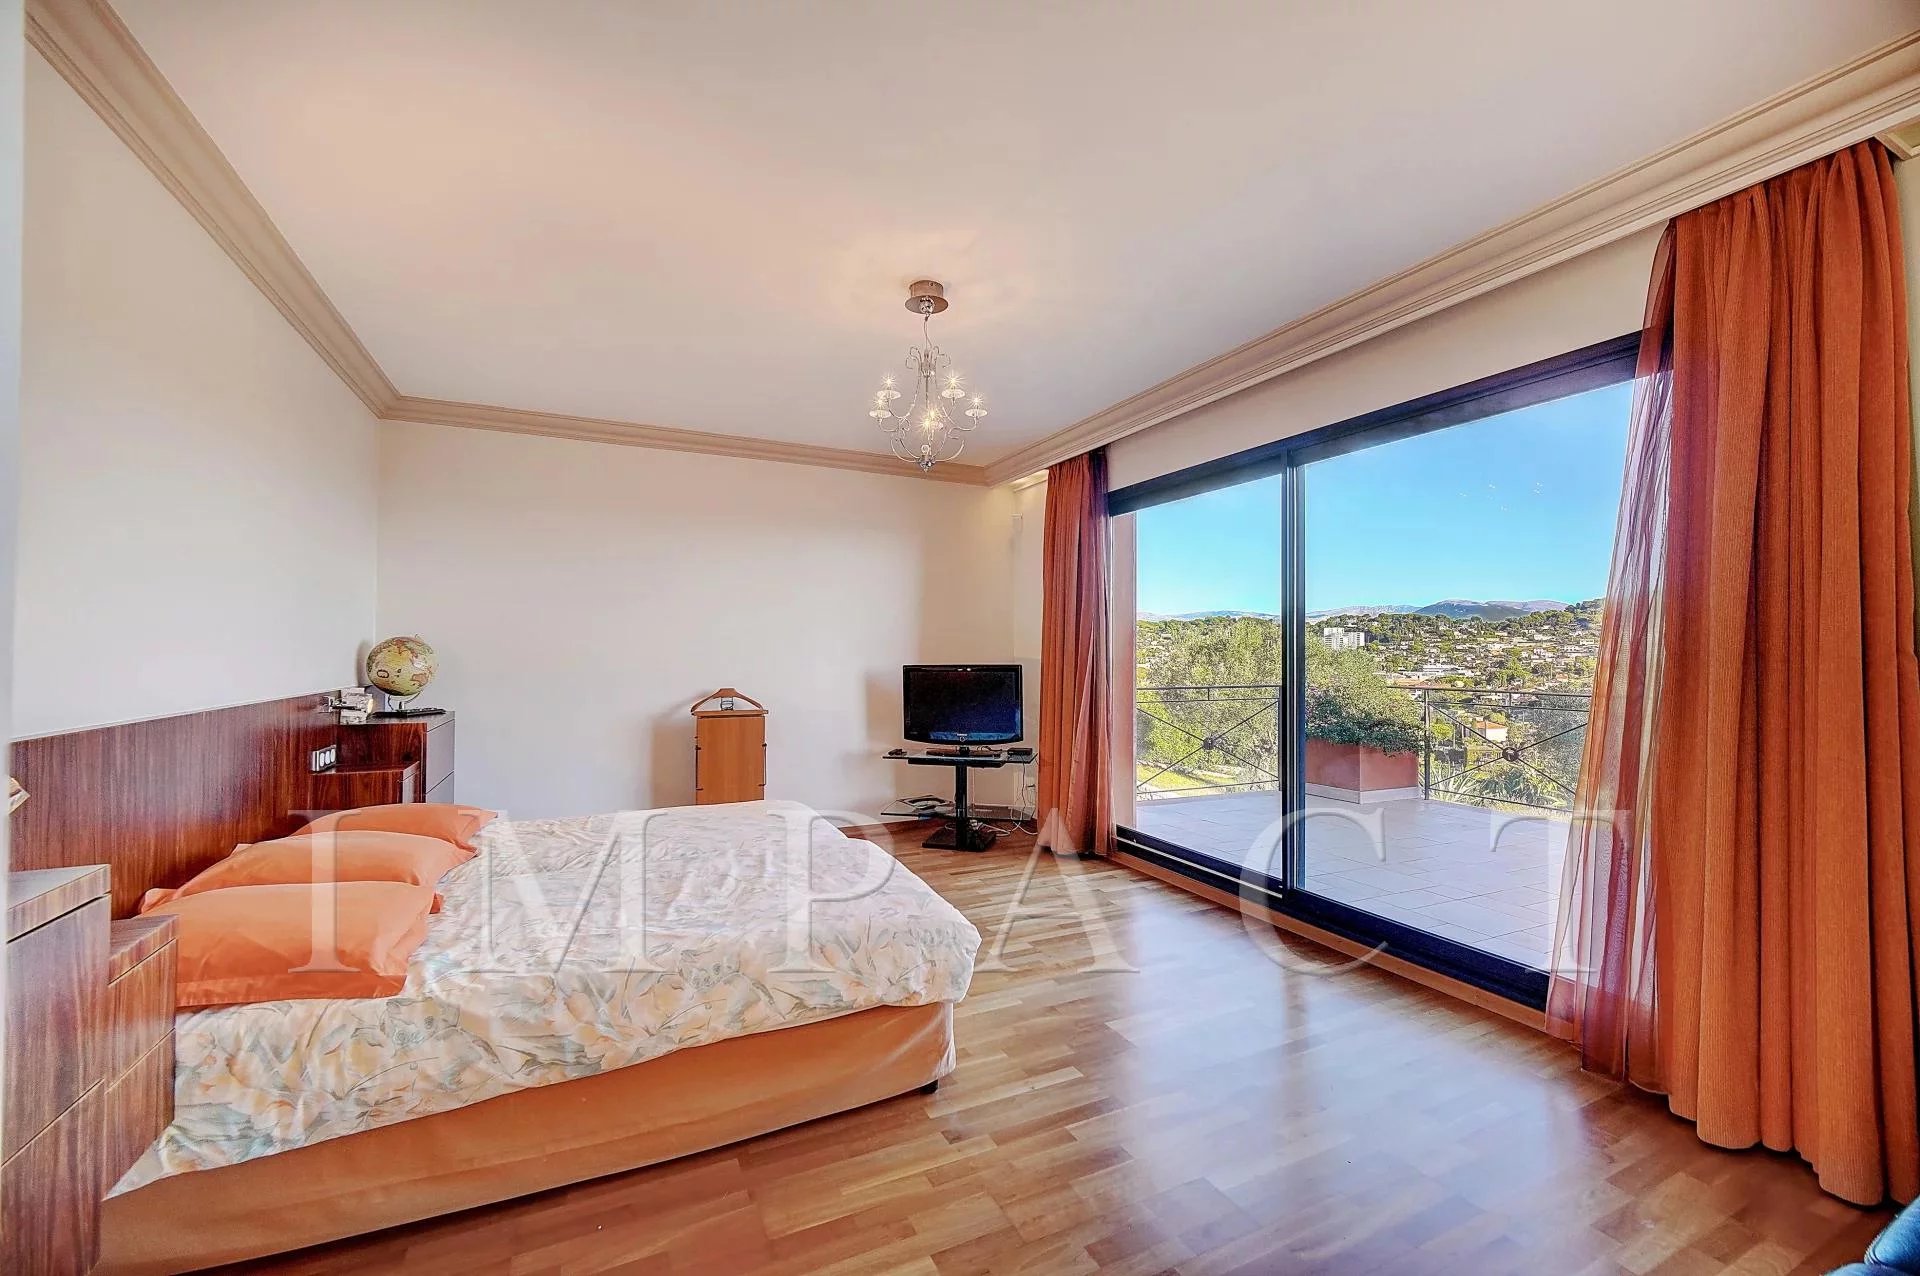 TOP OF THE HILLS - PANORAMIC SEA VIEW -